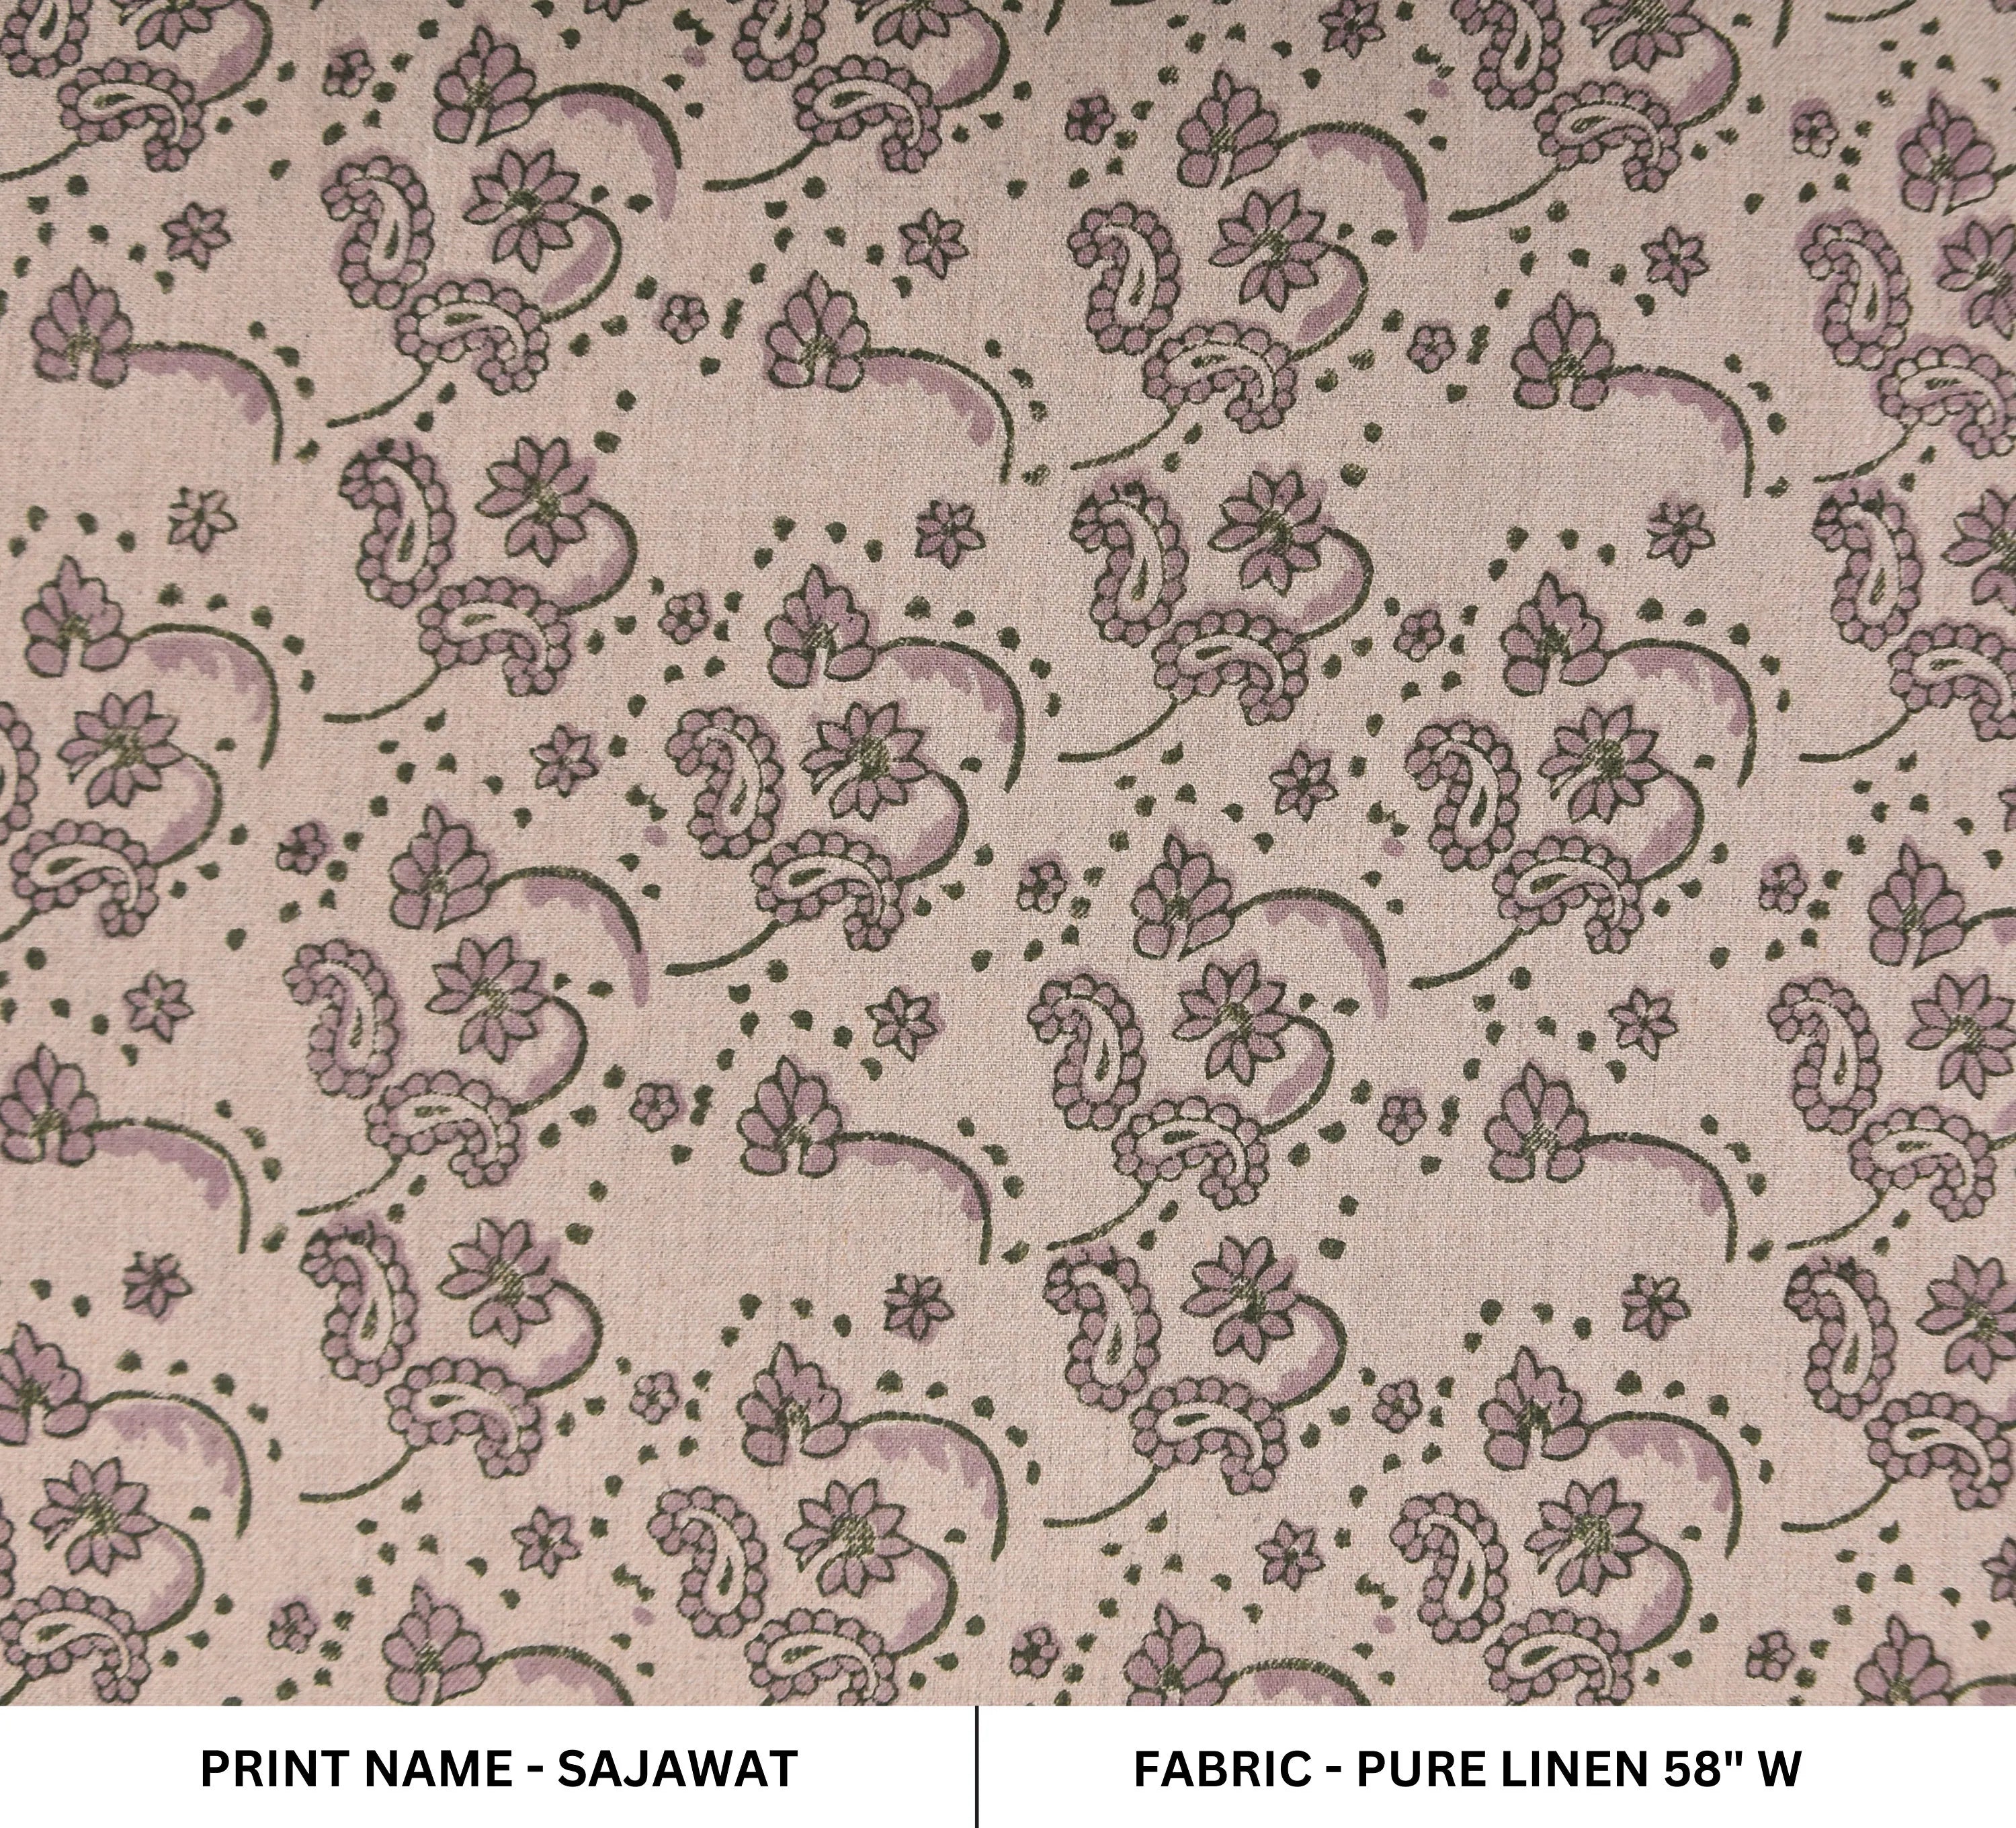 Pure linen 58" wide, block print fabric, linen fabric pillows and cushions, printed curtains, Indian hand block fabric - SAJAWAT